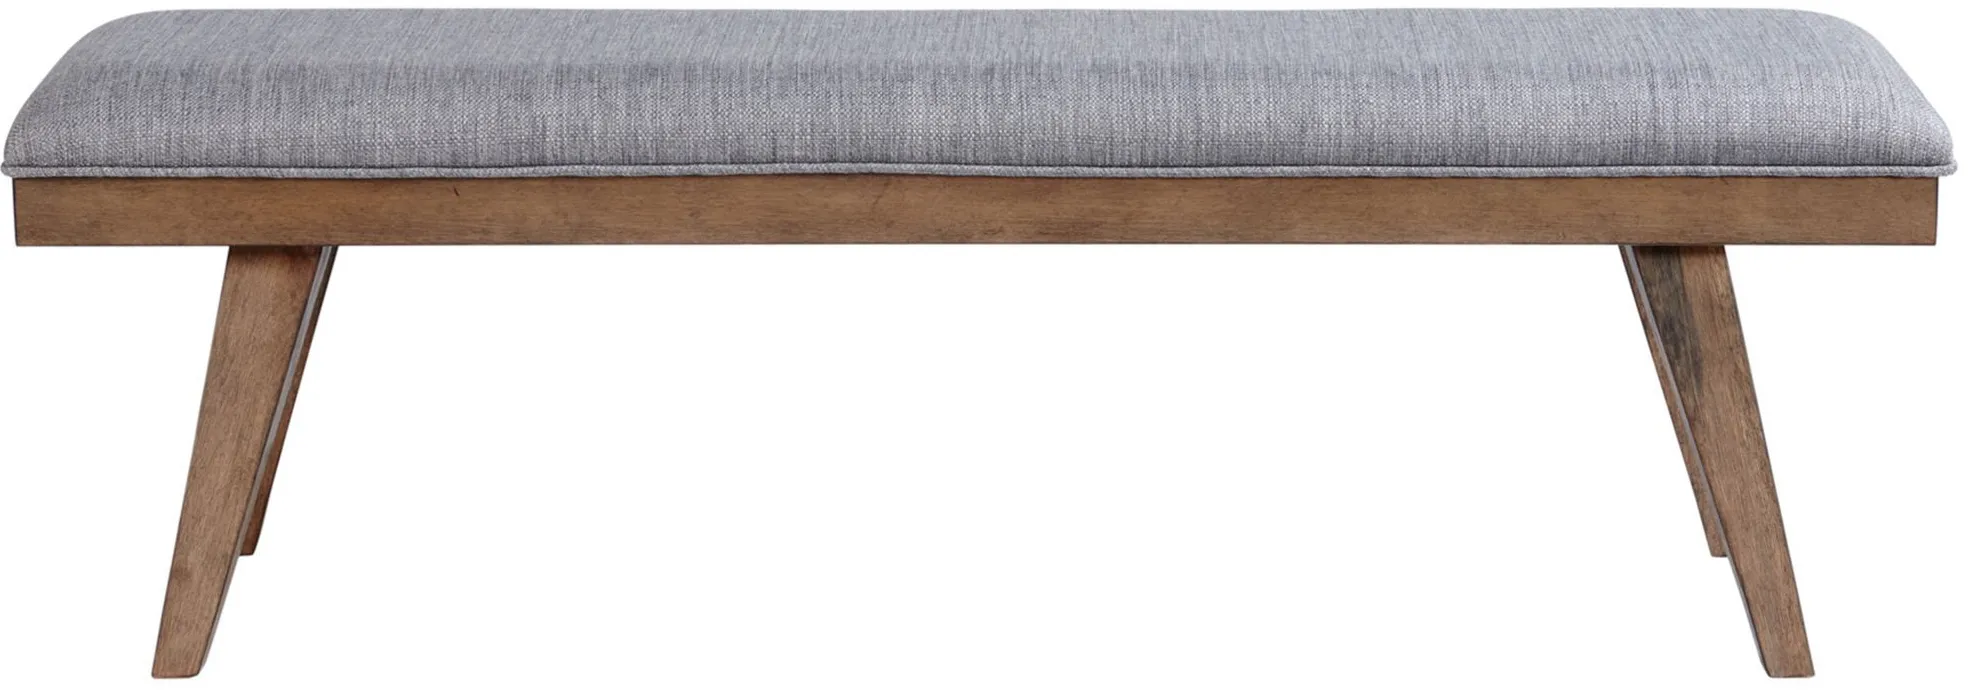 Oslo Bench in Weathered Chestnut by Intercon